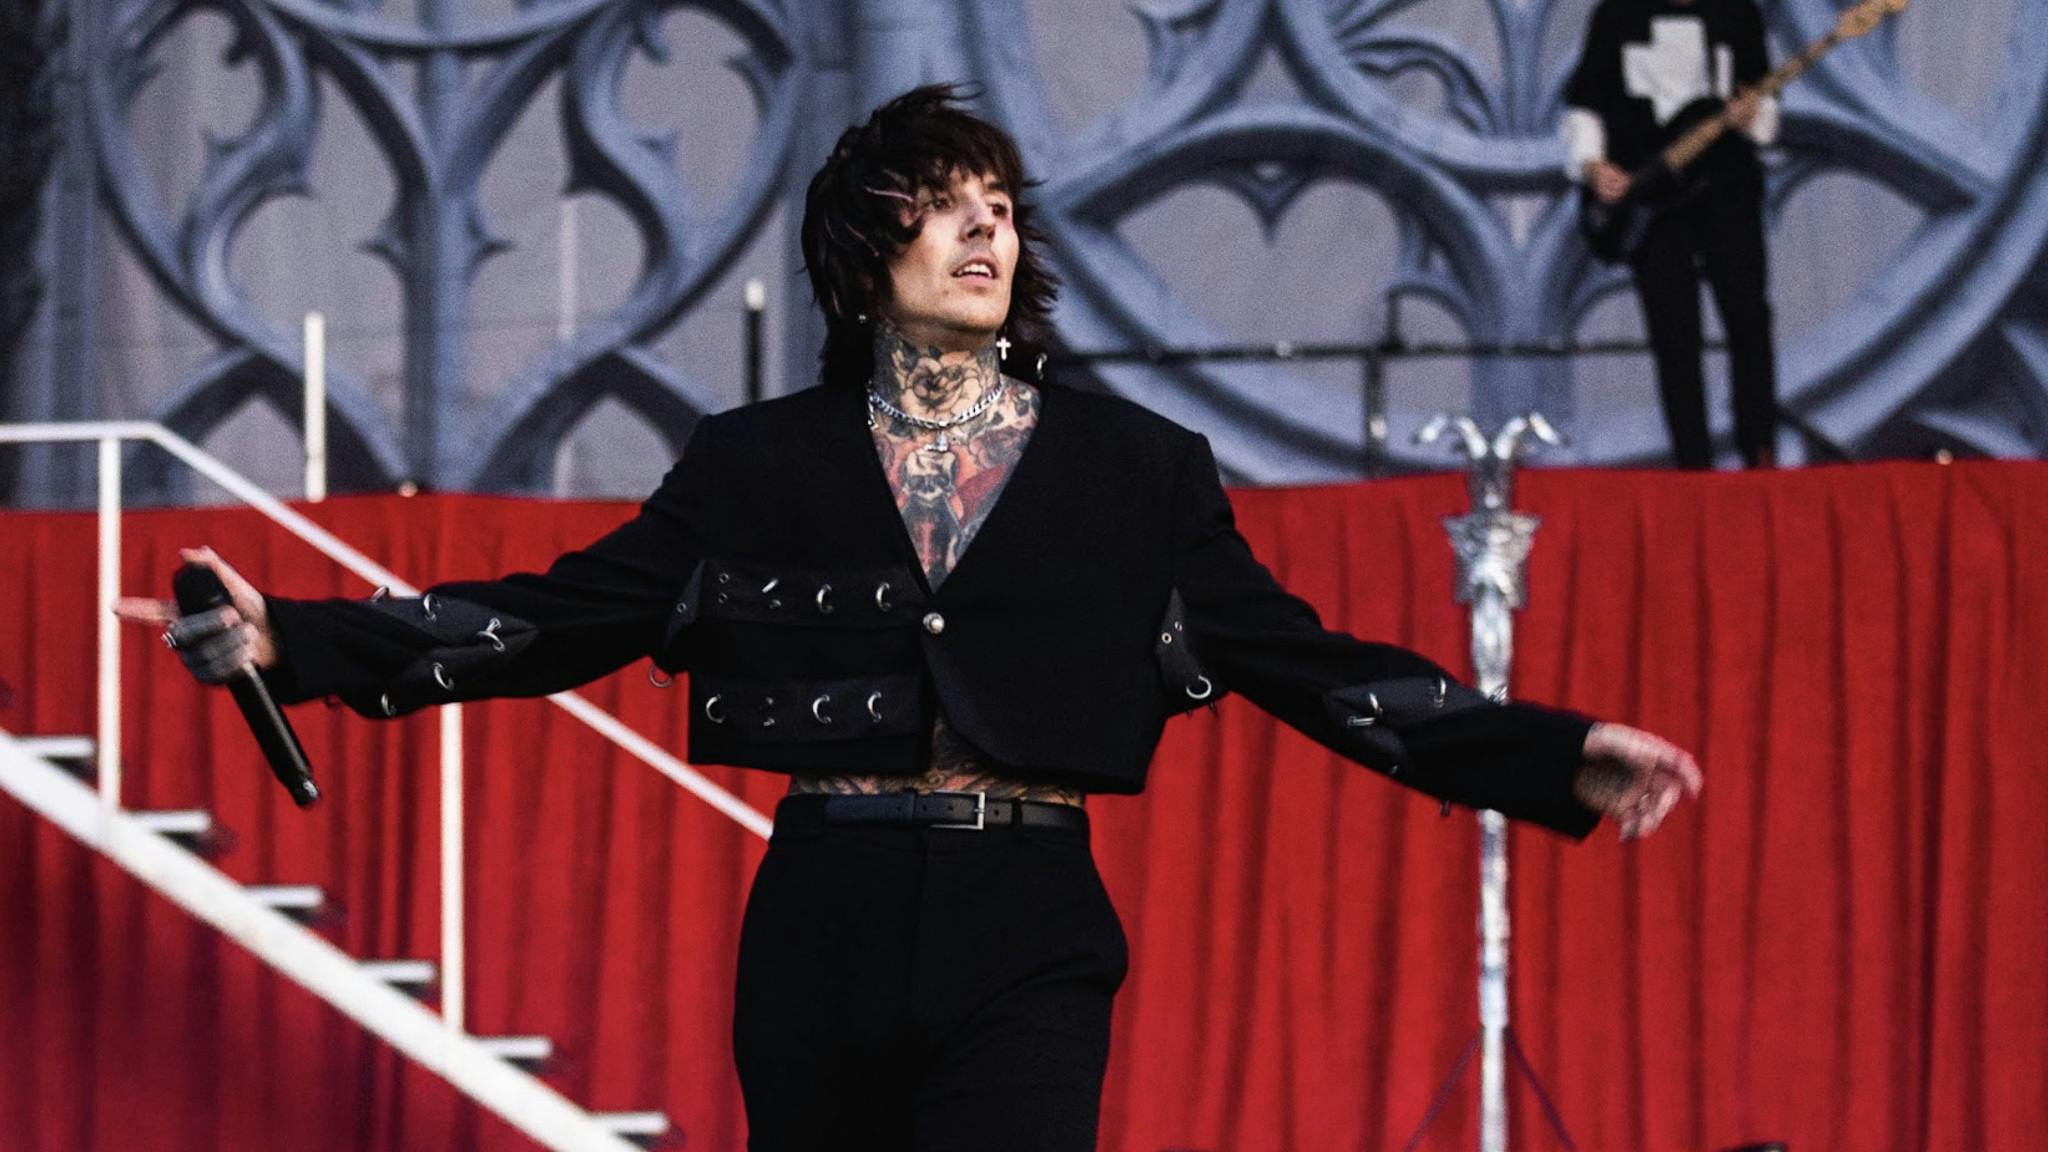 Listen to Bring Me The Horizon’s powerful new single, DArkSide